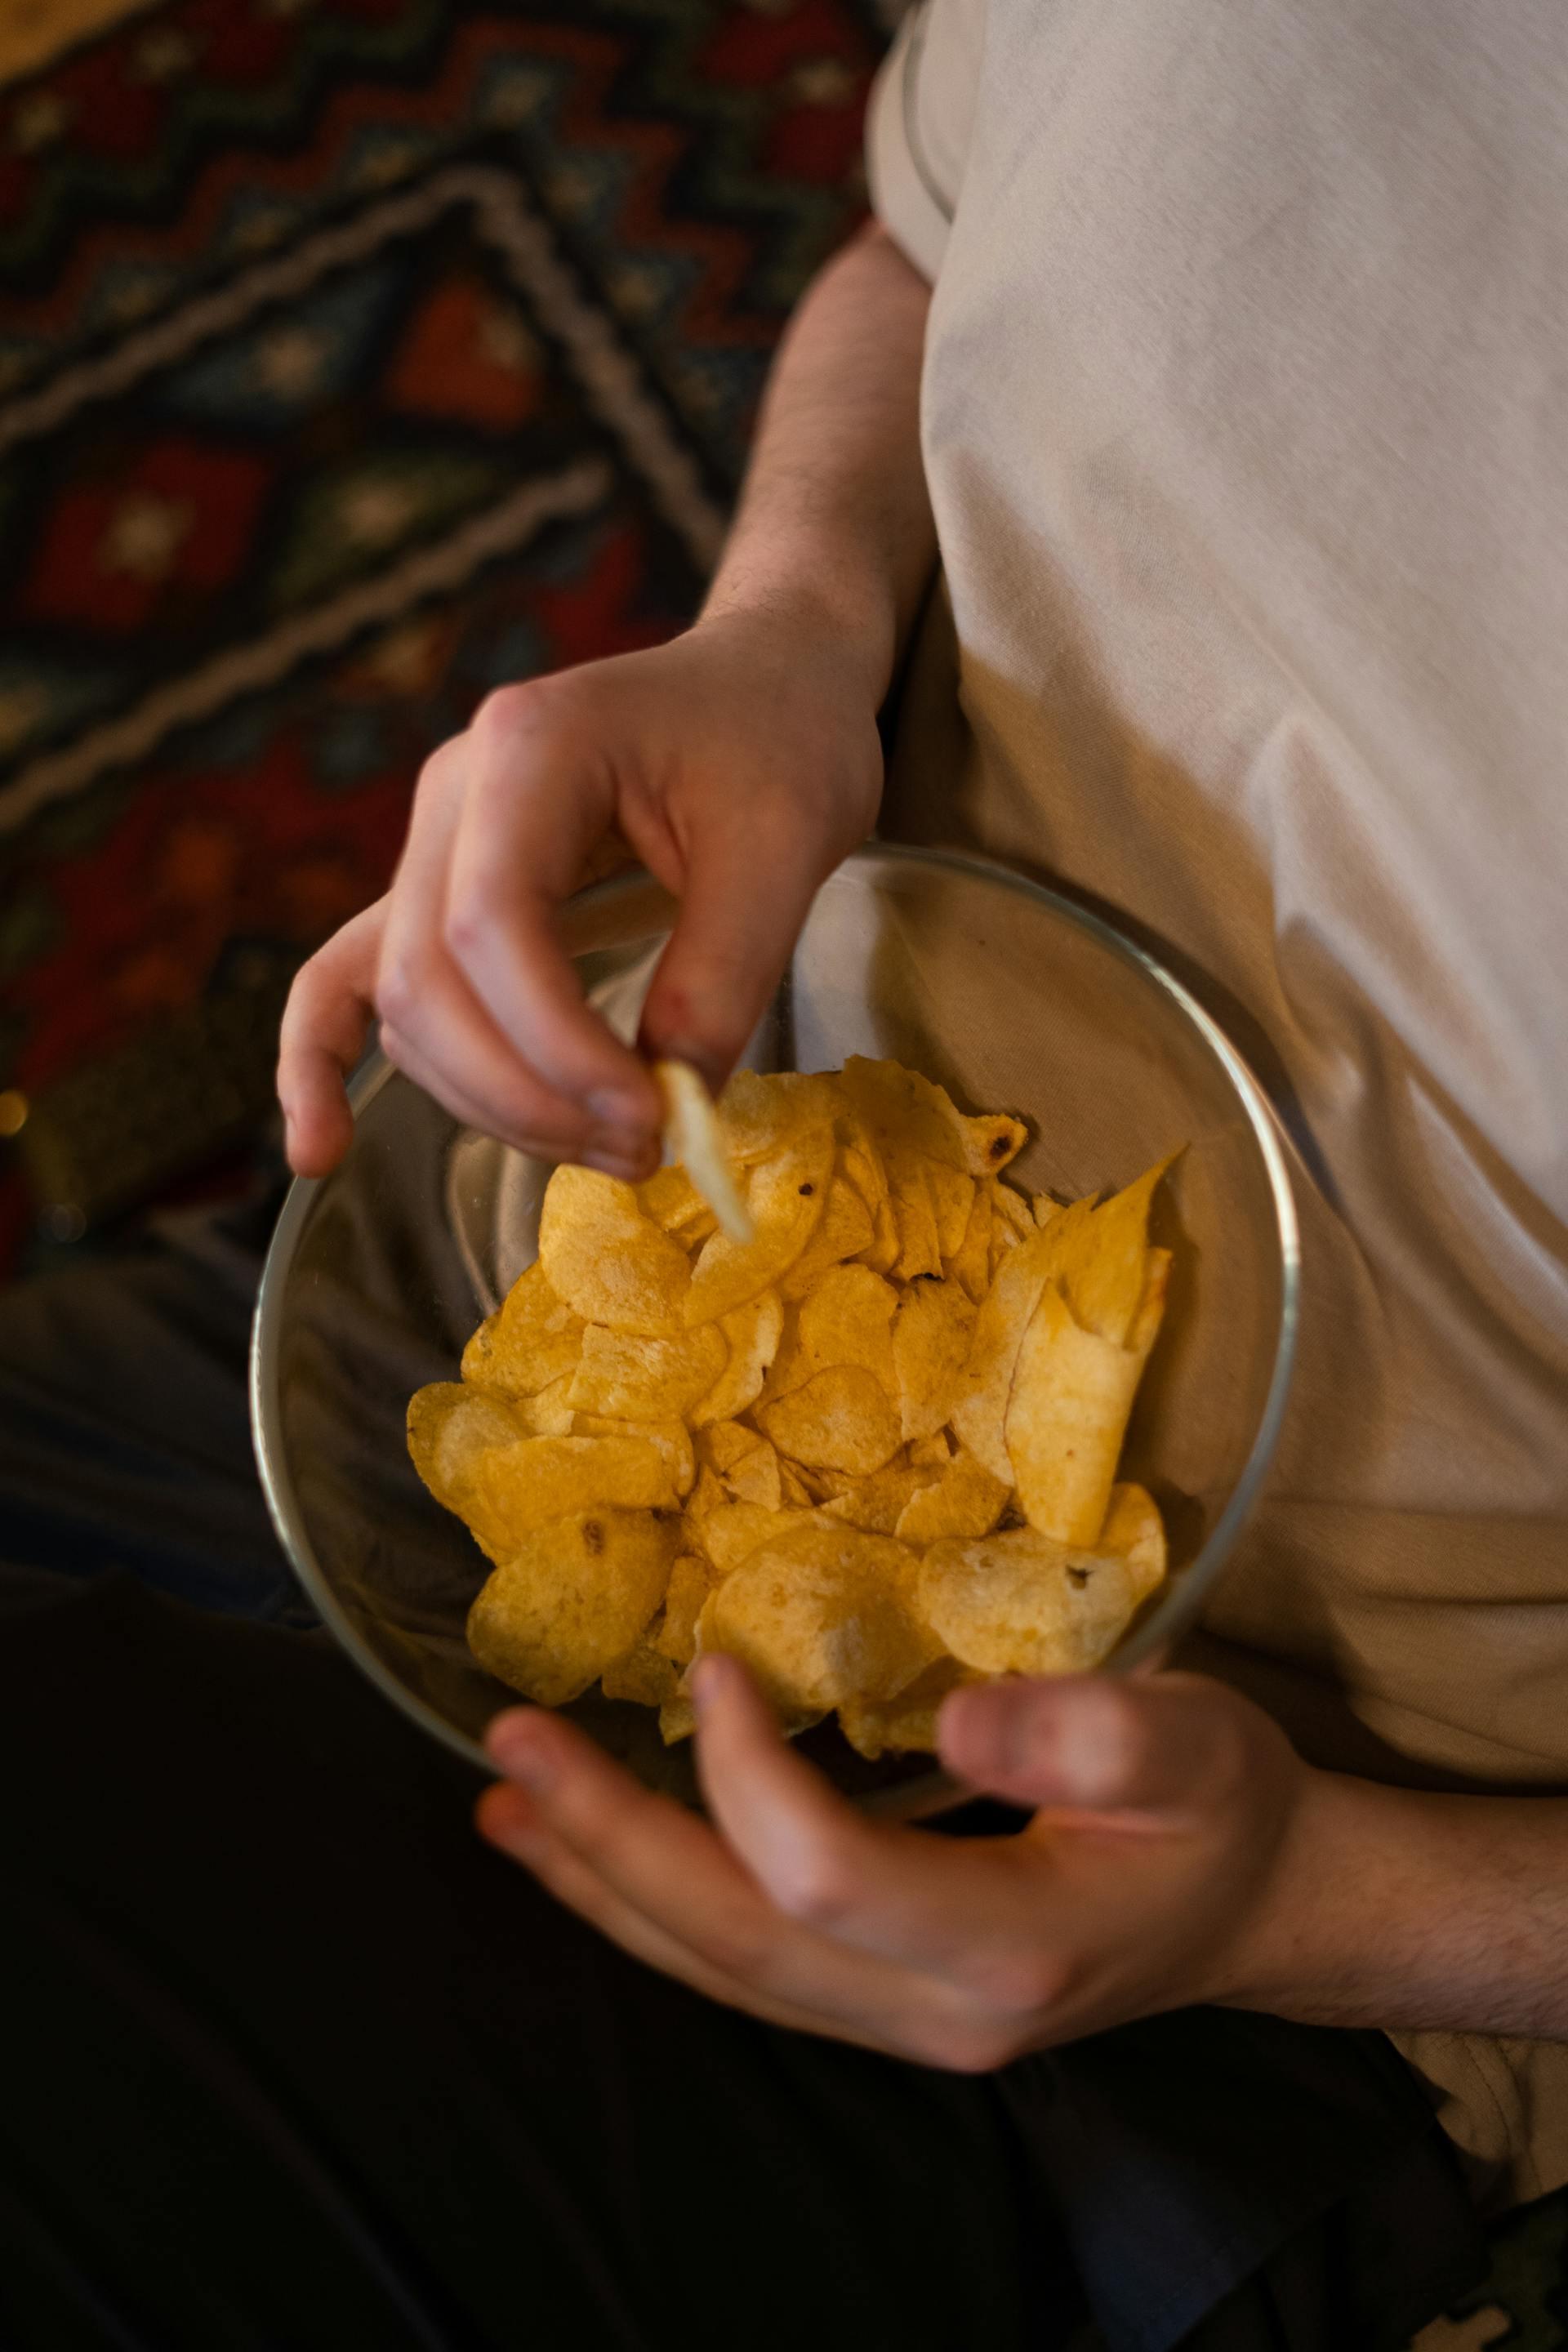 A person holding a bowl of chips | Source: Pexels